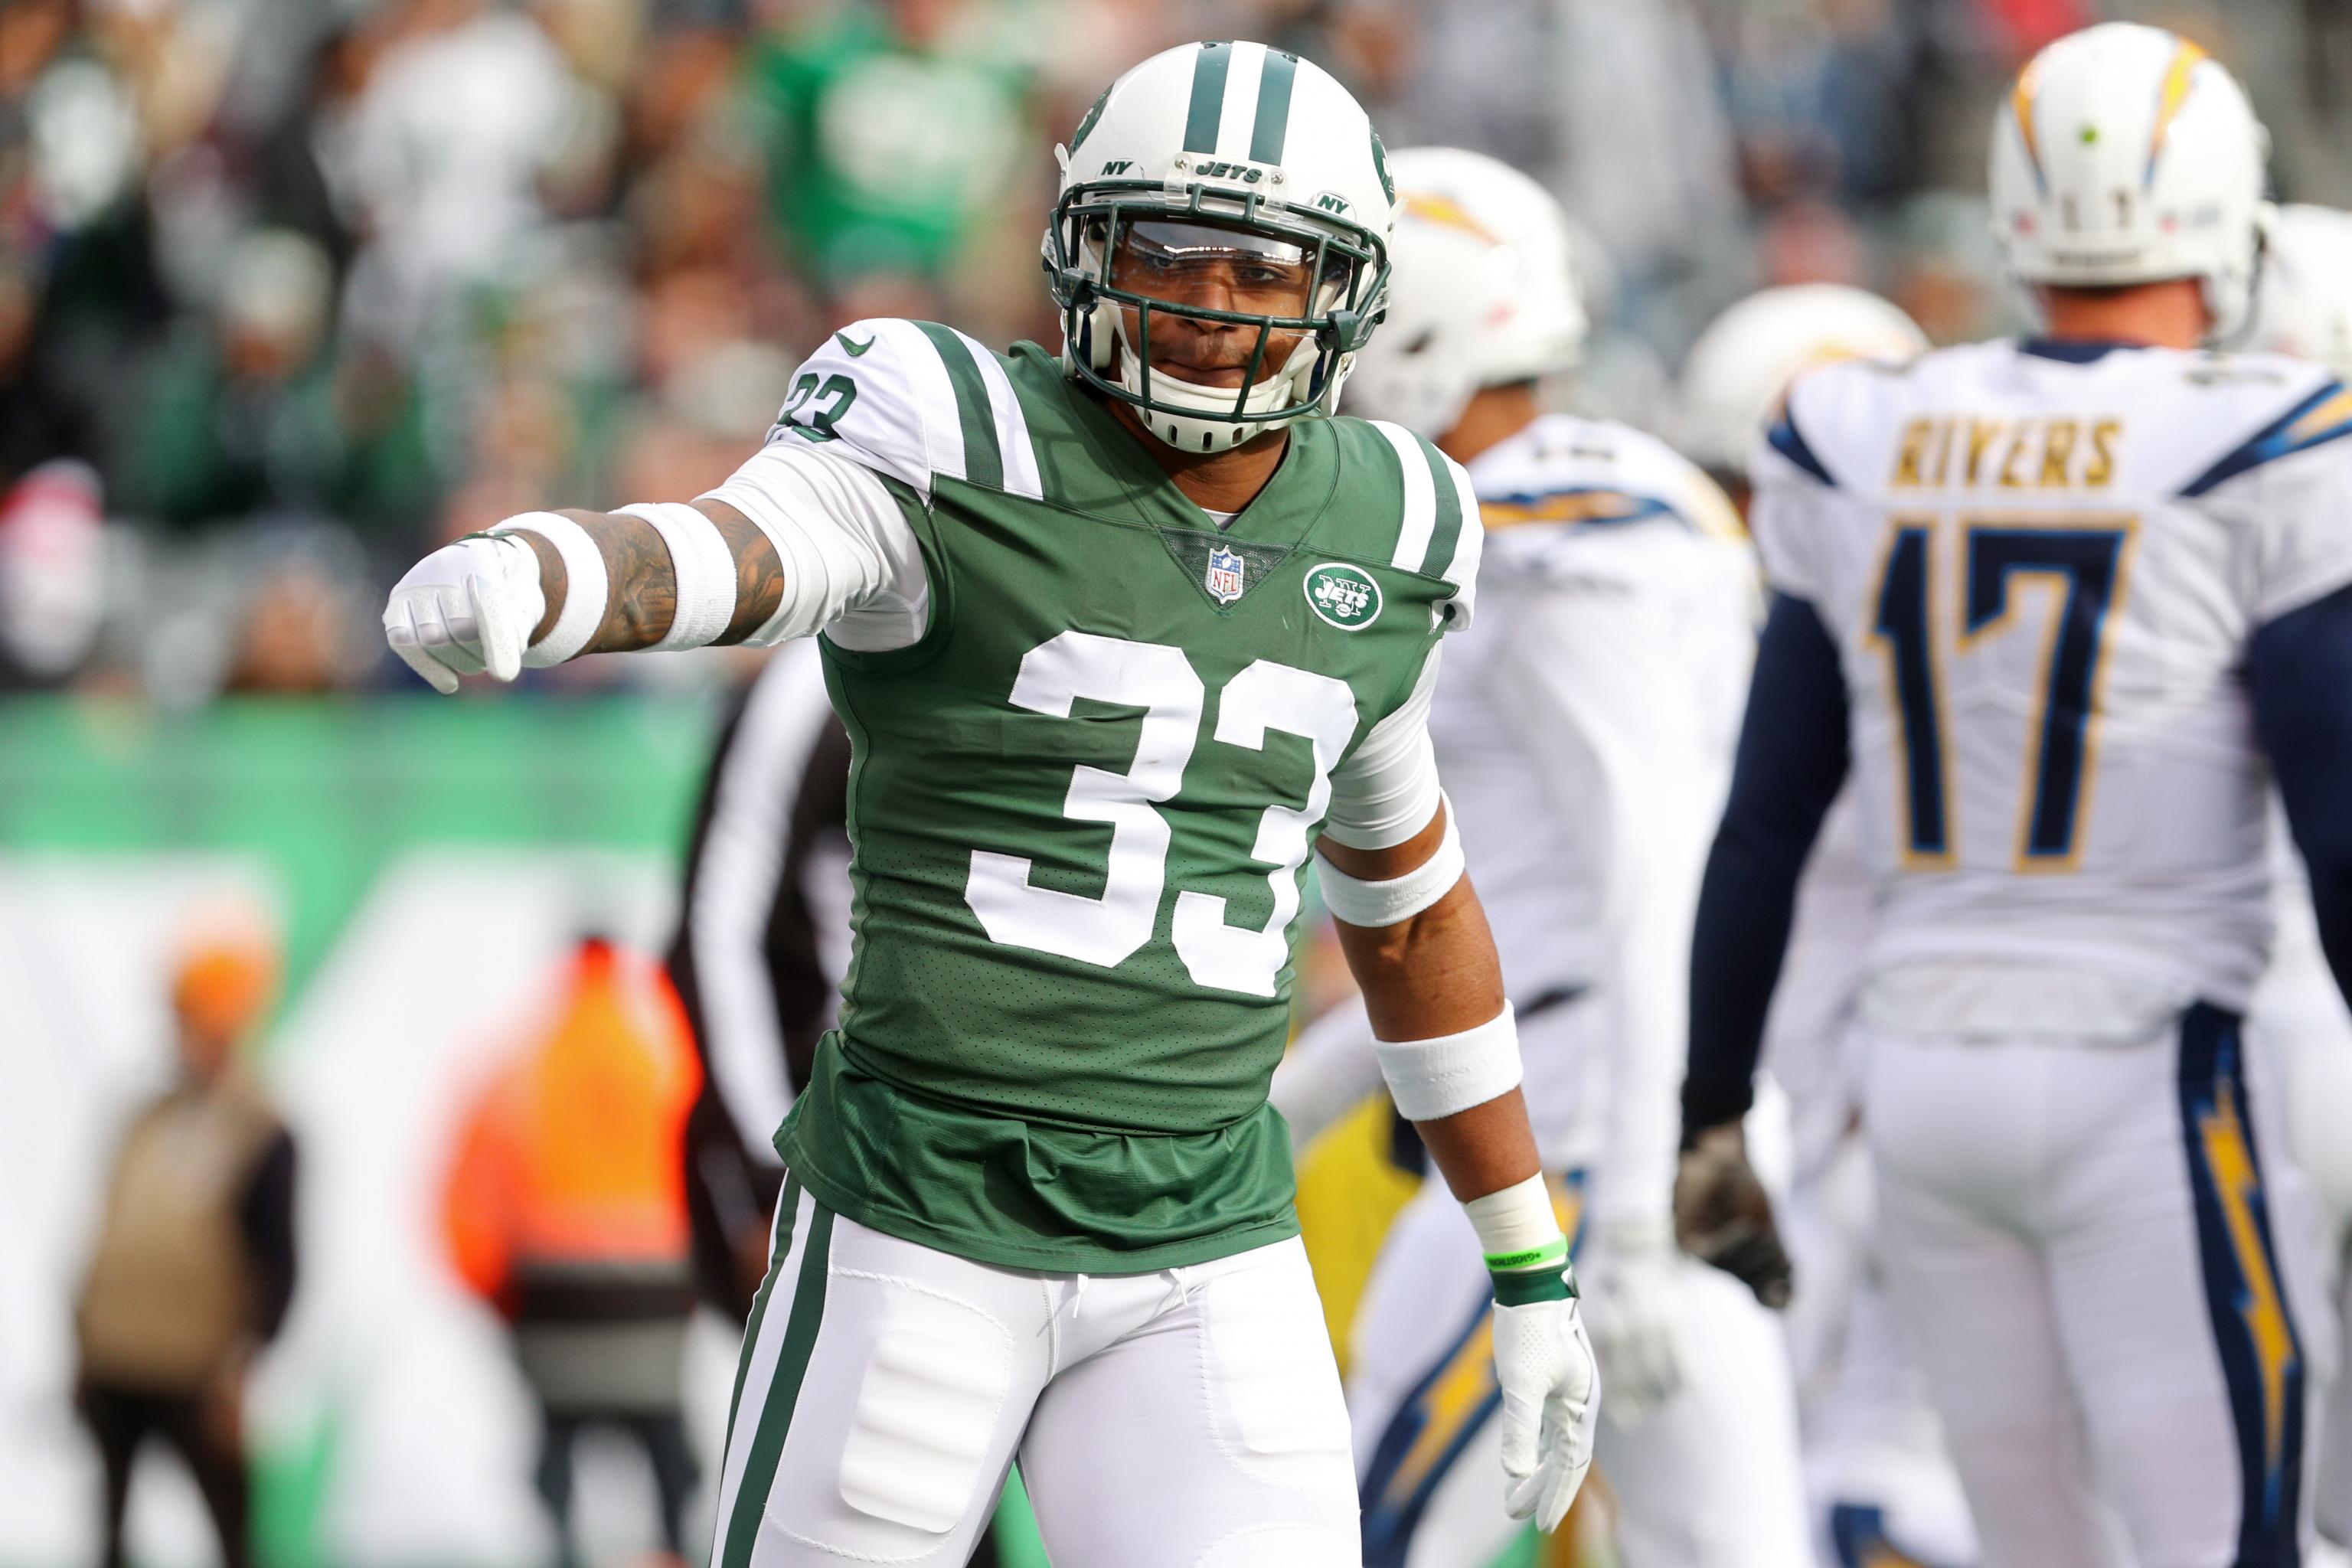 Jets, rest of NFL, can wear alternate uniforms 3 times in 2018